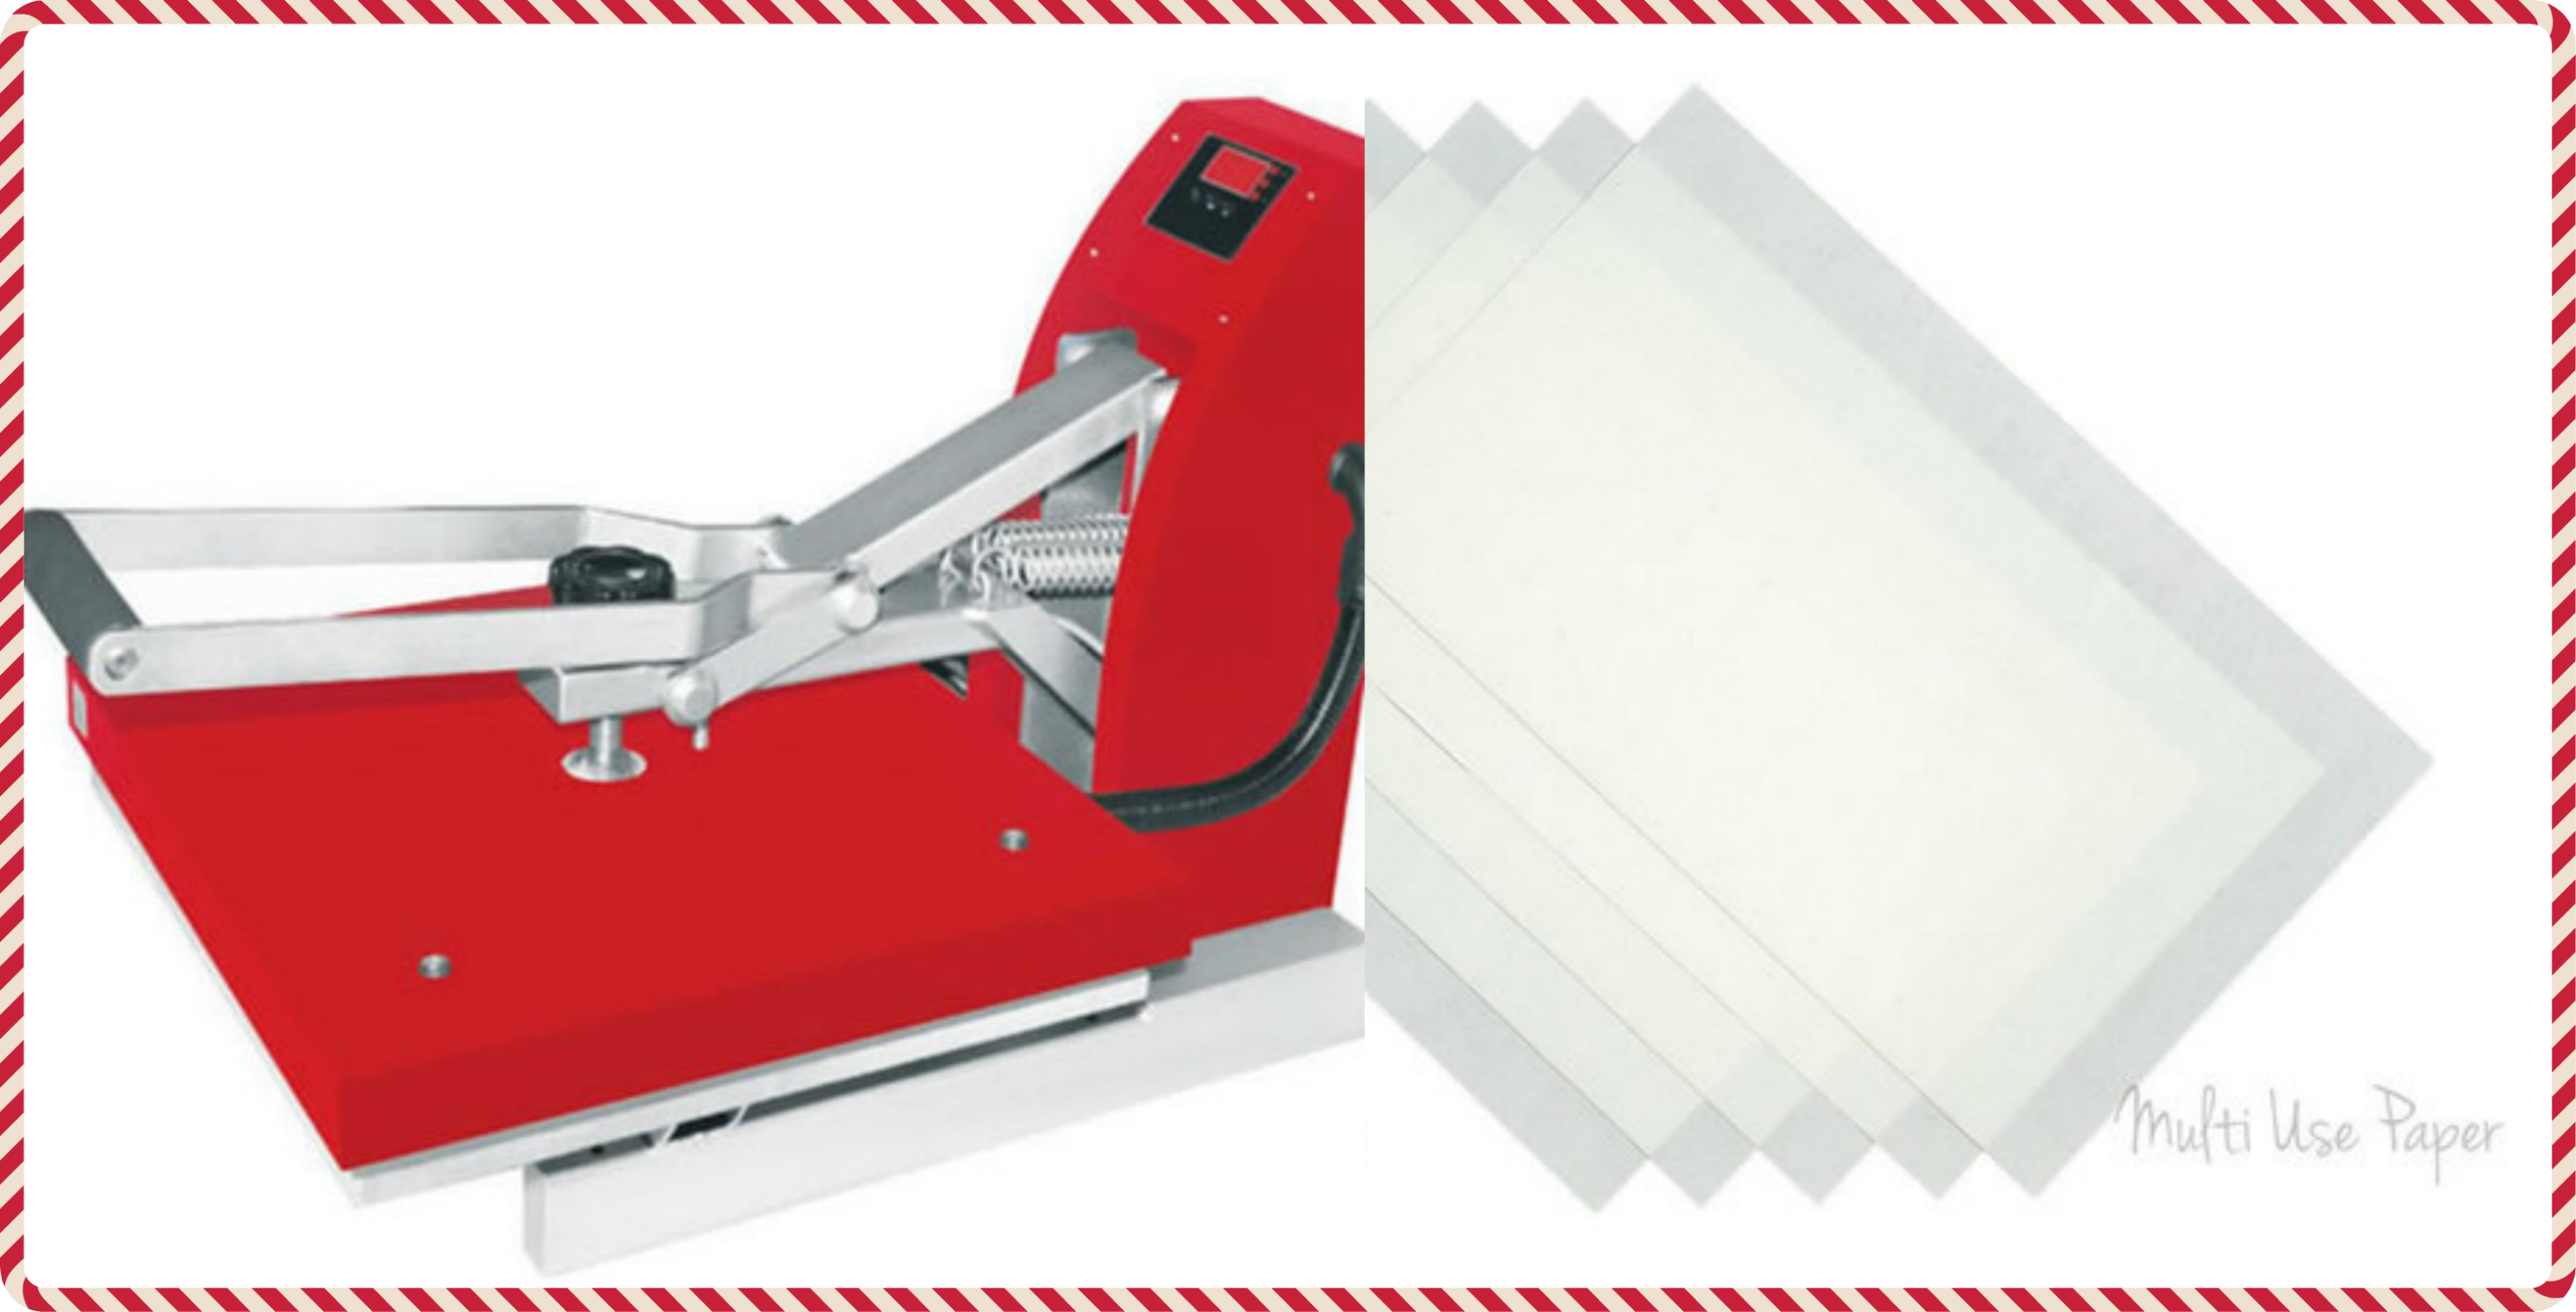 Siser red clam Heat Press & Multi Use Paper